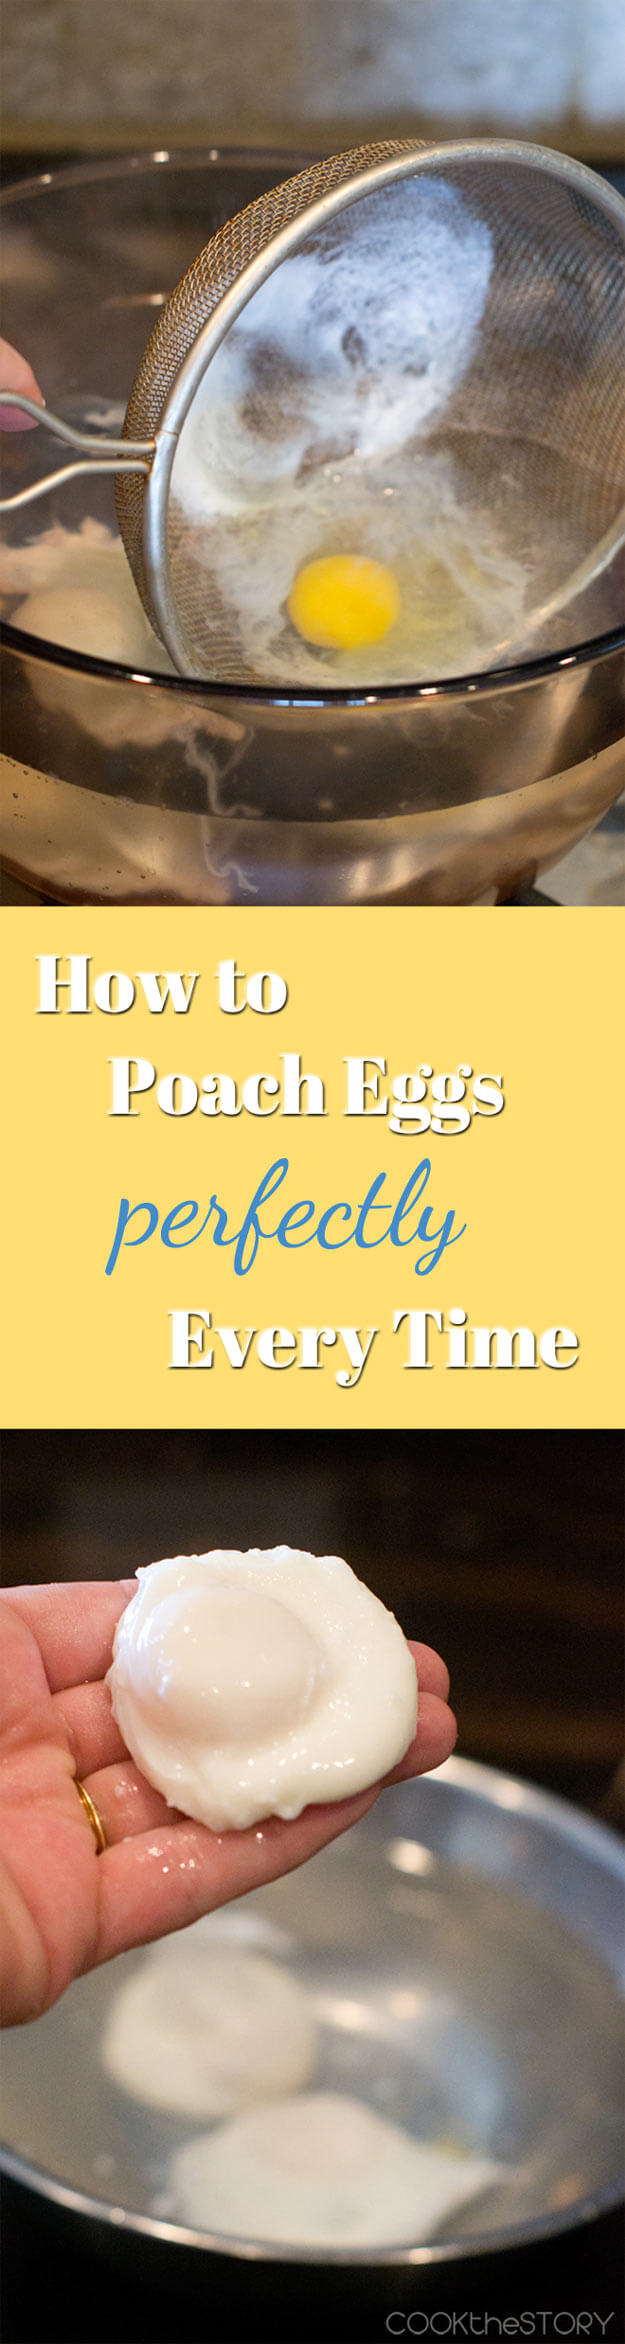 Poach Eggs Perfectly Every Time